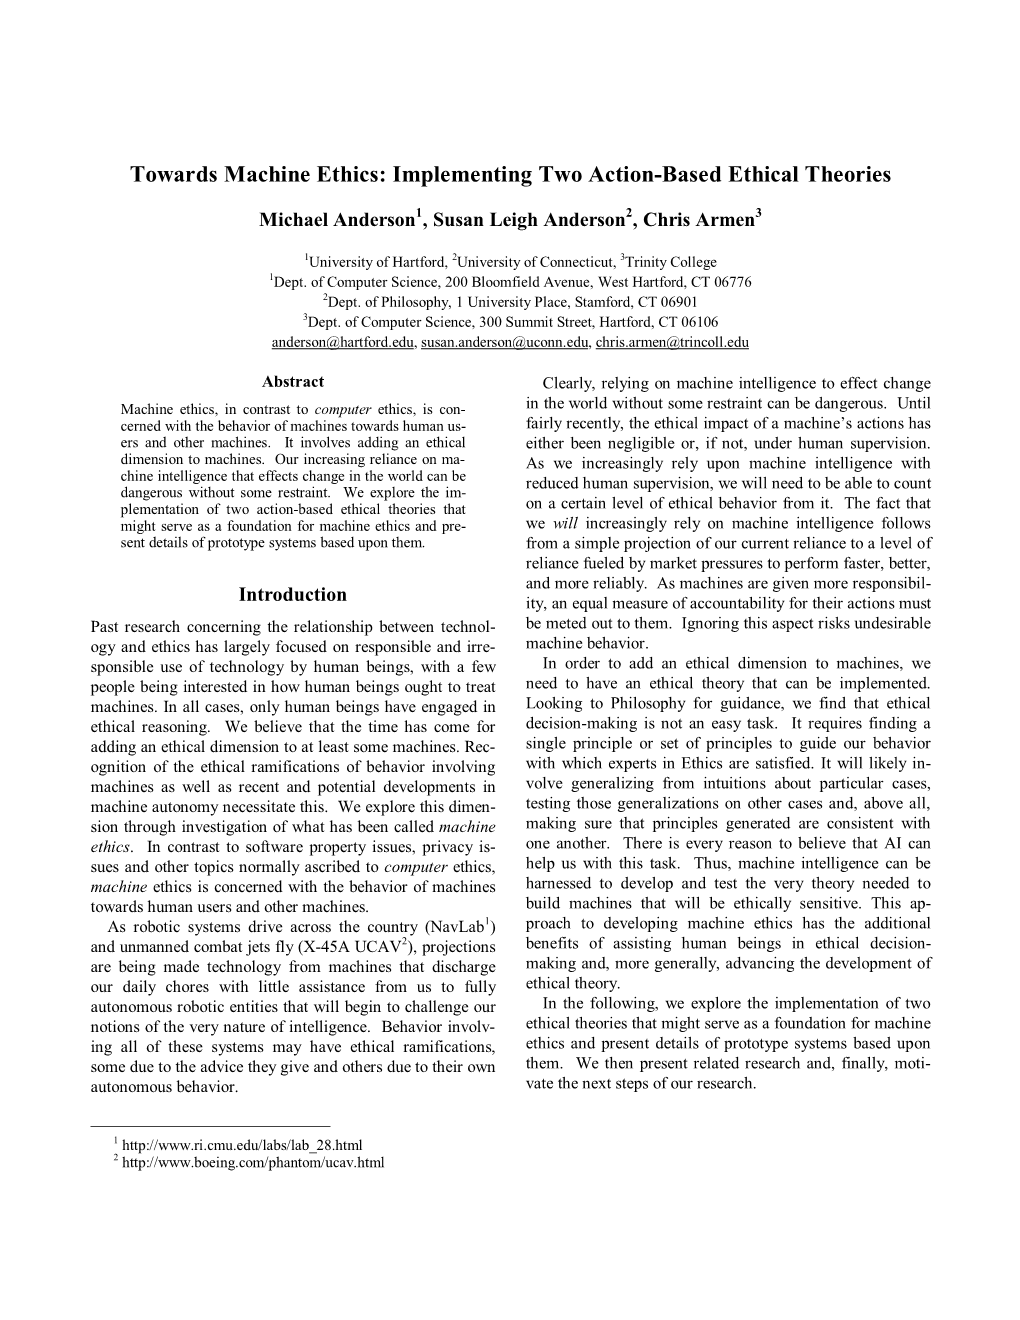 Implementing Two Action-Based Ethical Theories